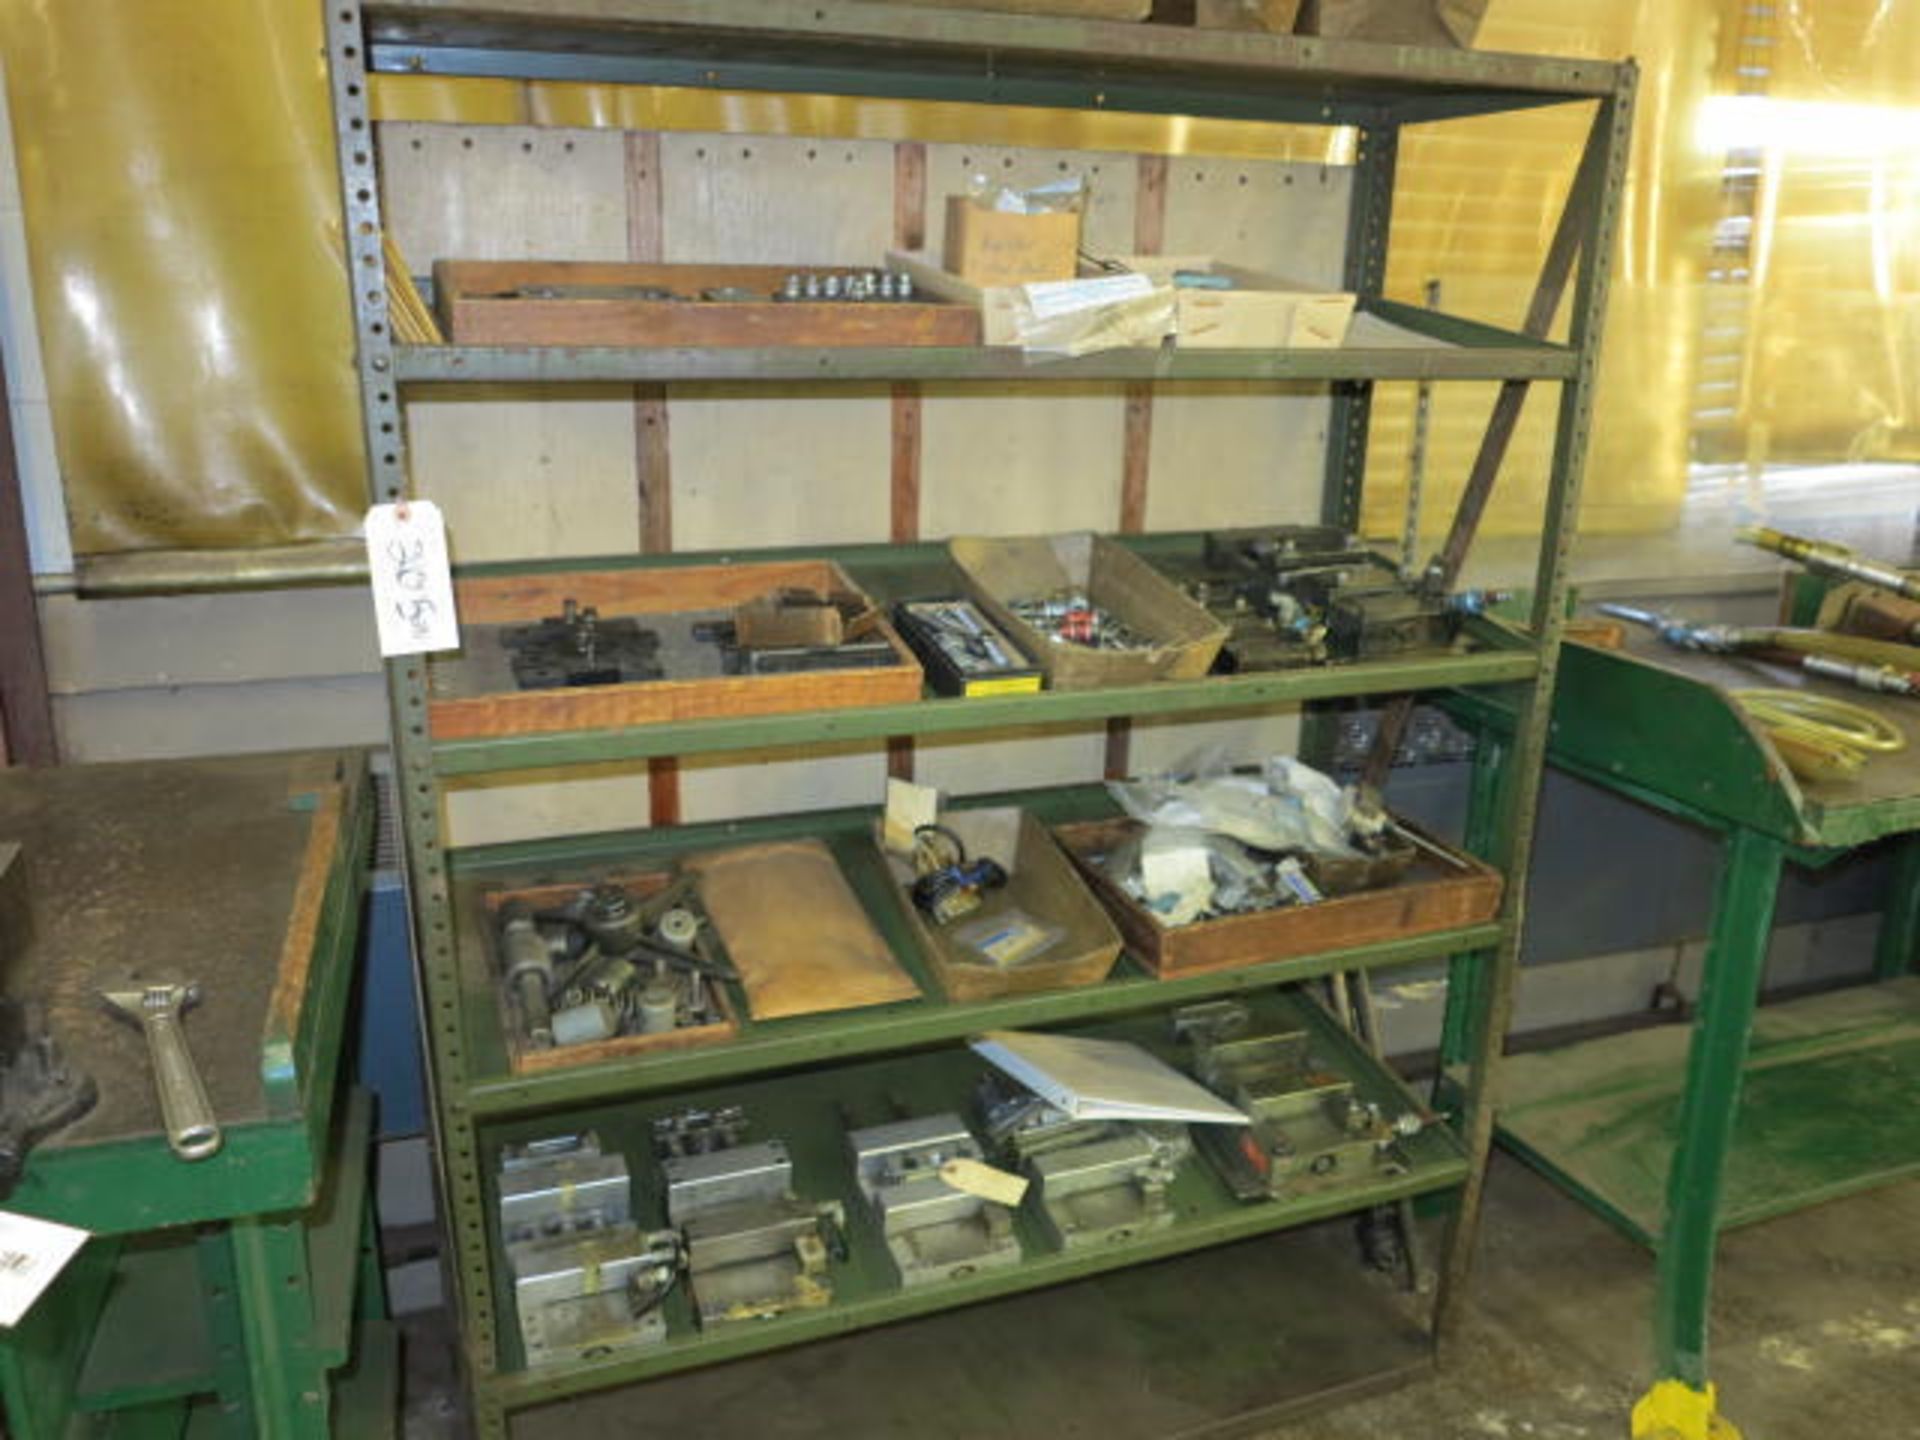 Rack of Air Feeds and Parts